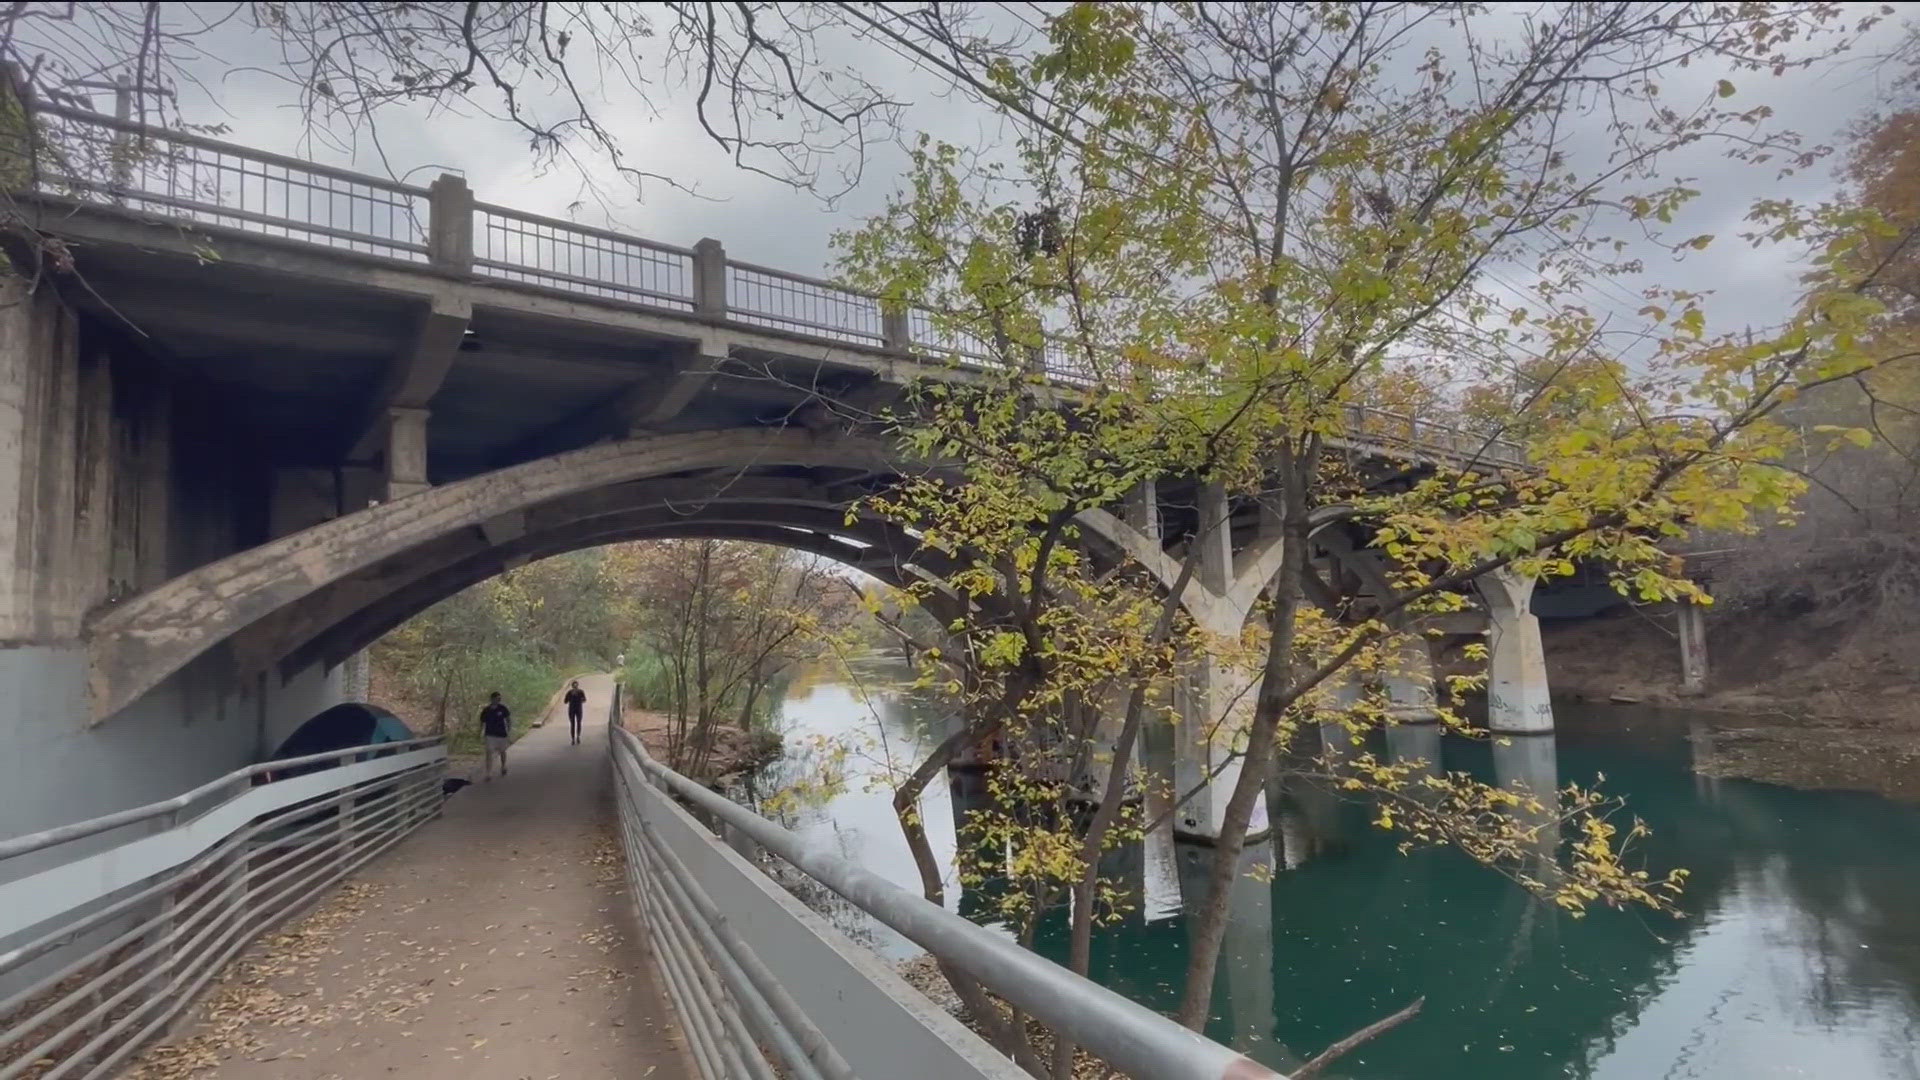 The bridge is considered to be in fair condition, but the City Council is weighing its options on whether or not to improve it or replace it altogether.